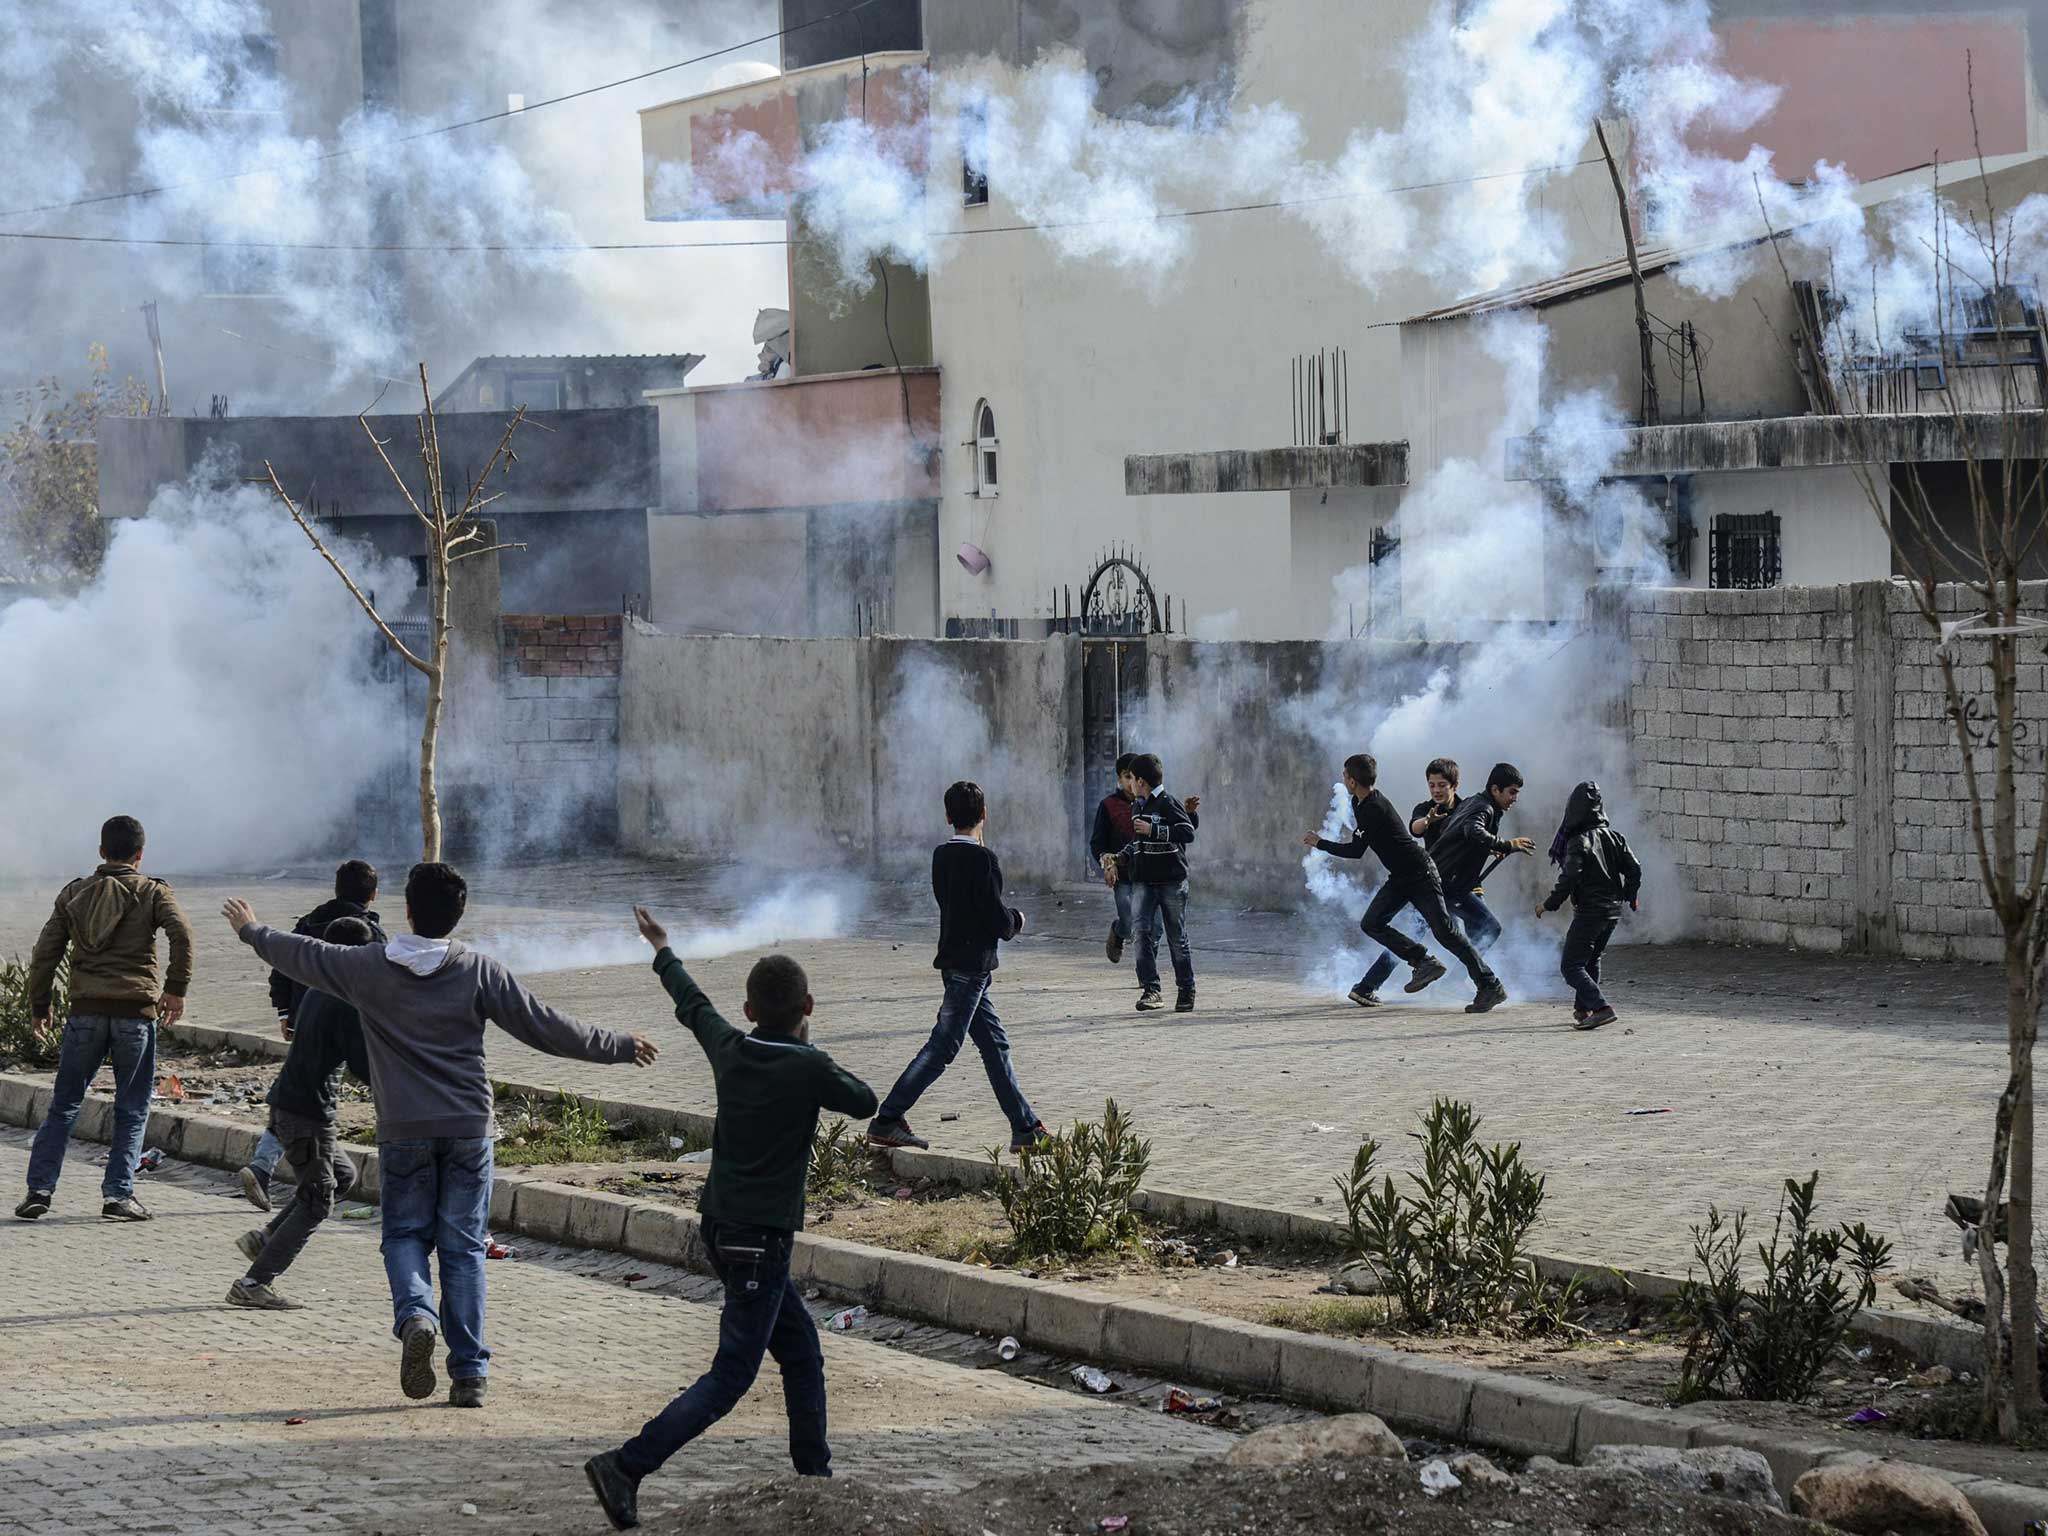 Young boys run amid the rising smoke in Cirze in late December last year, tensions have been rising in the region